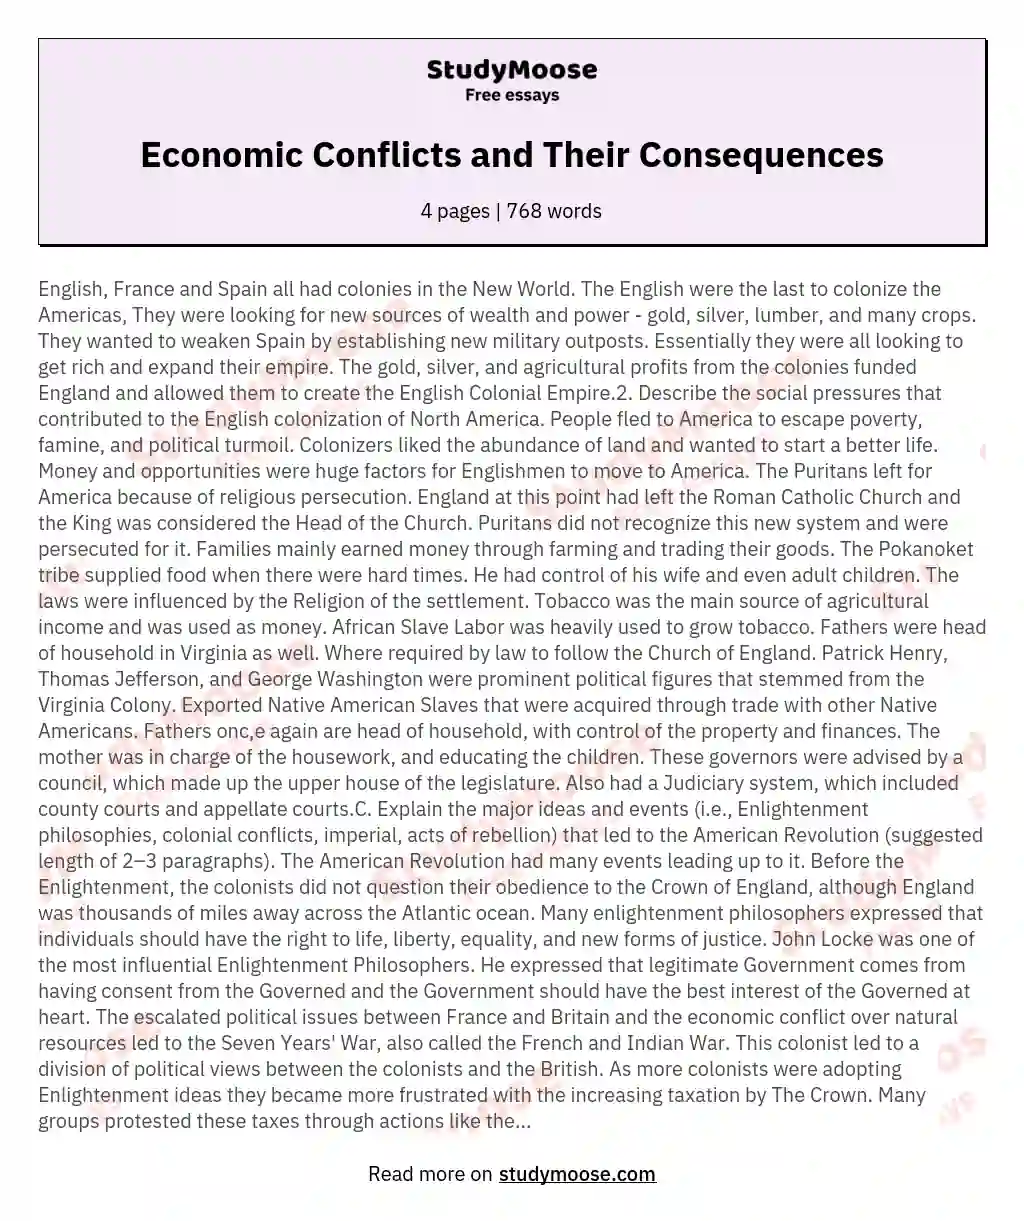 Economic Conflicts and Their Consequences essay